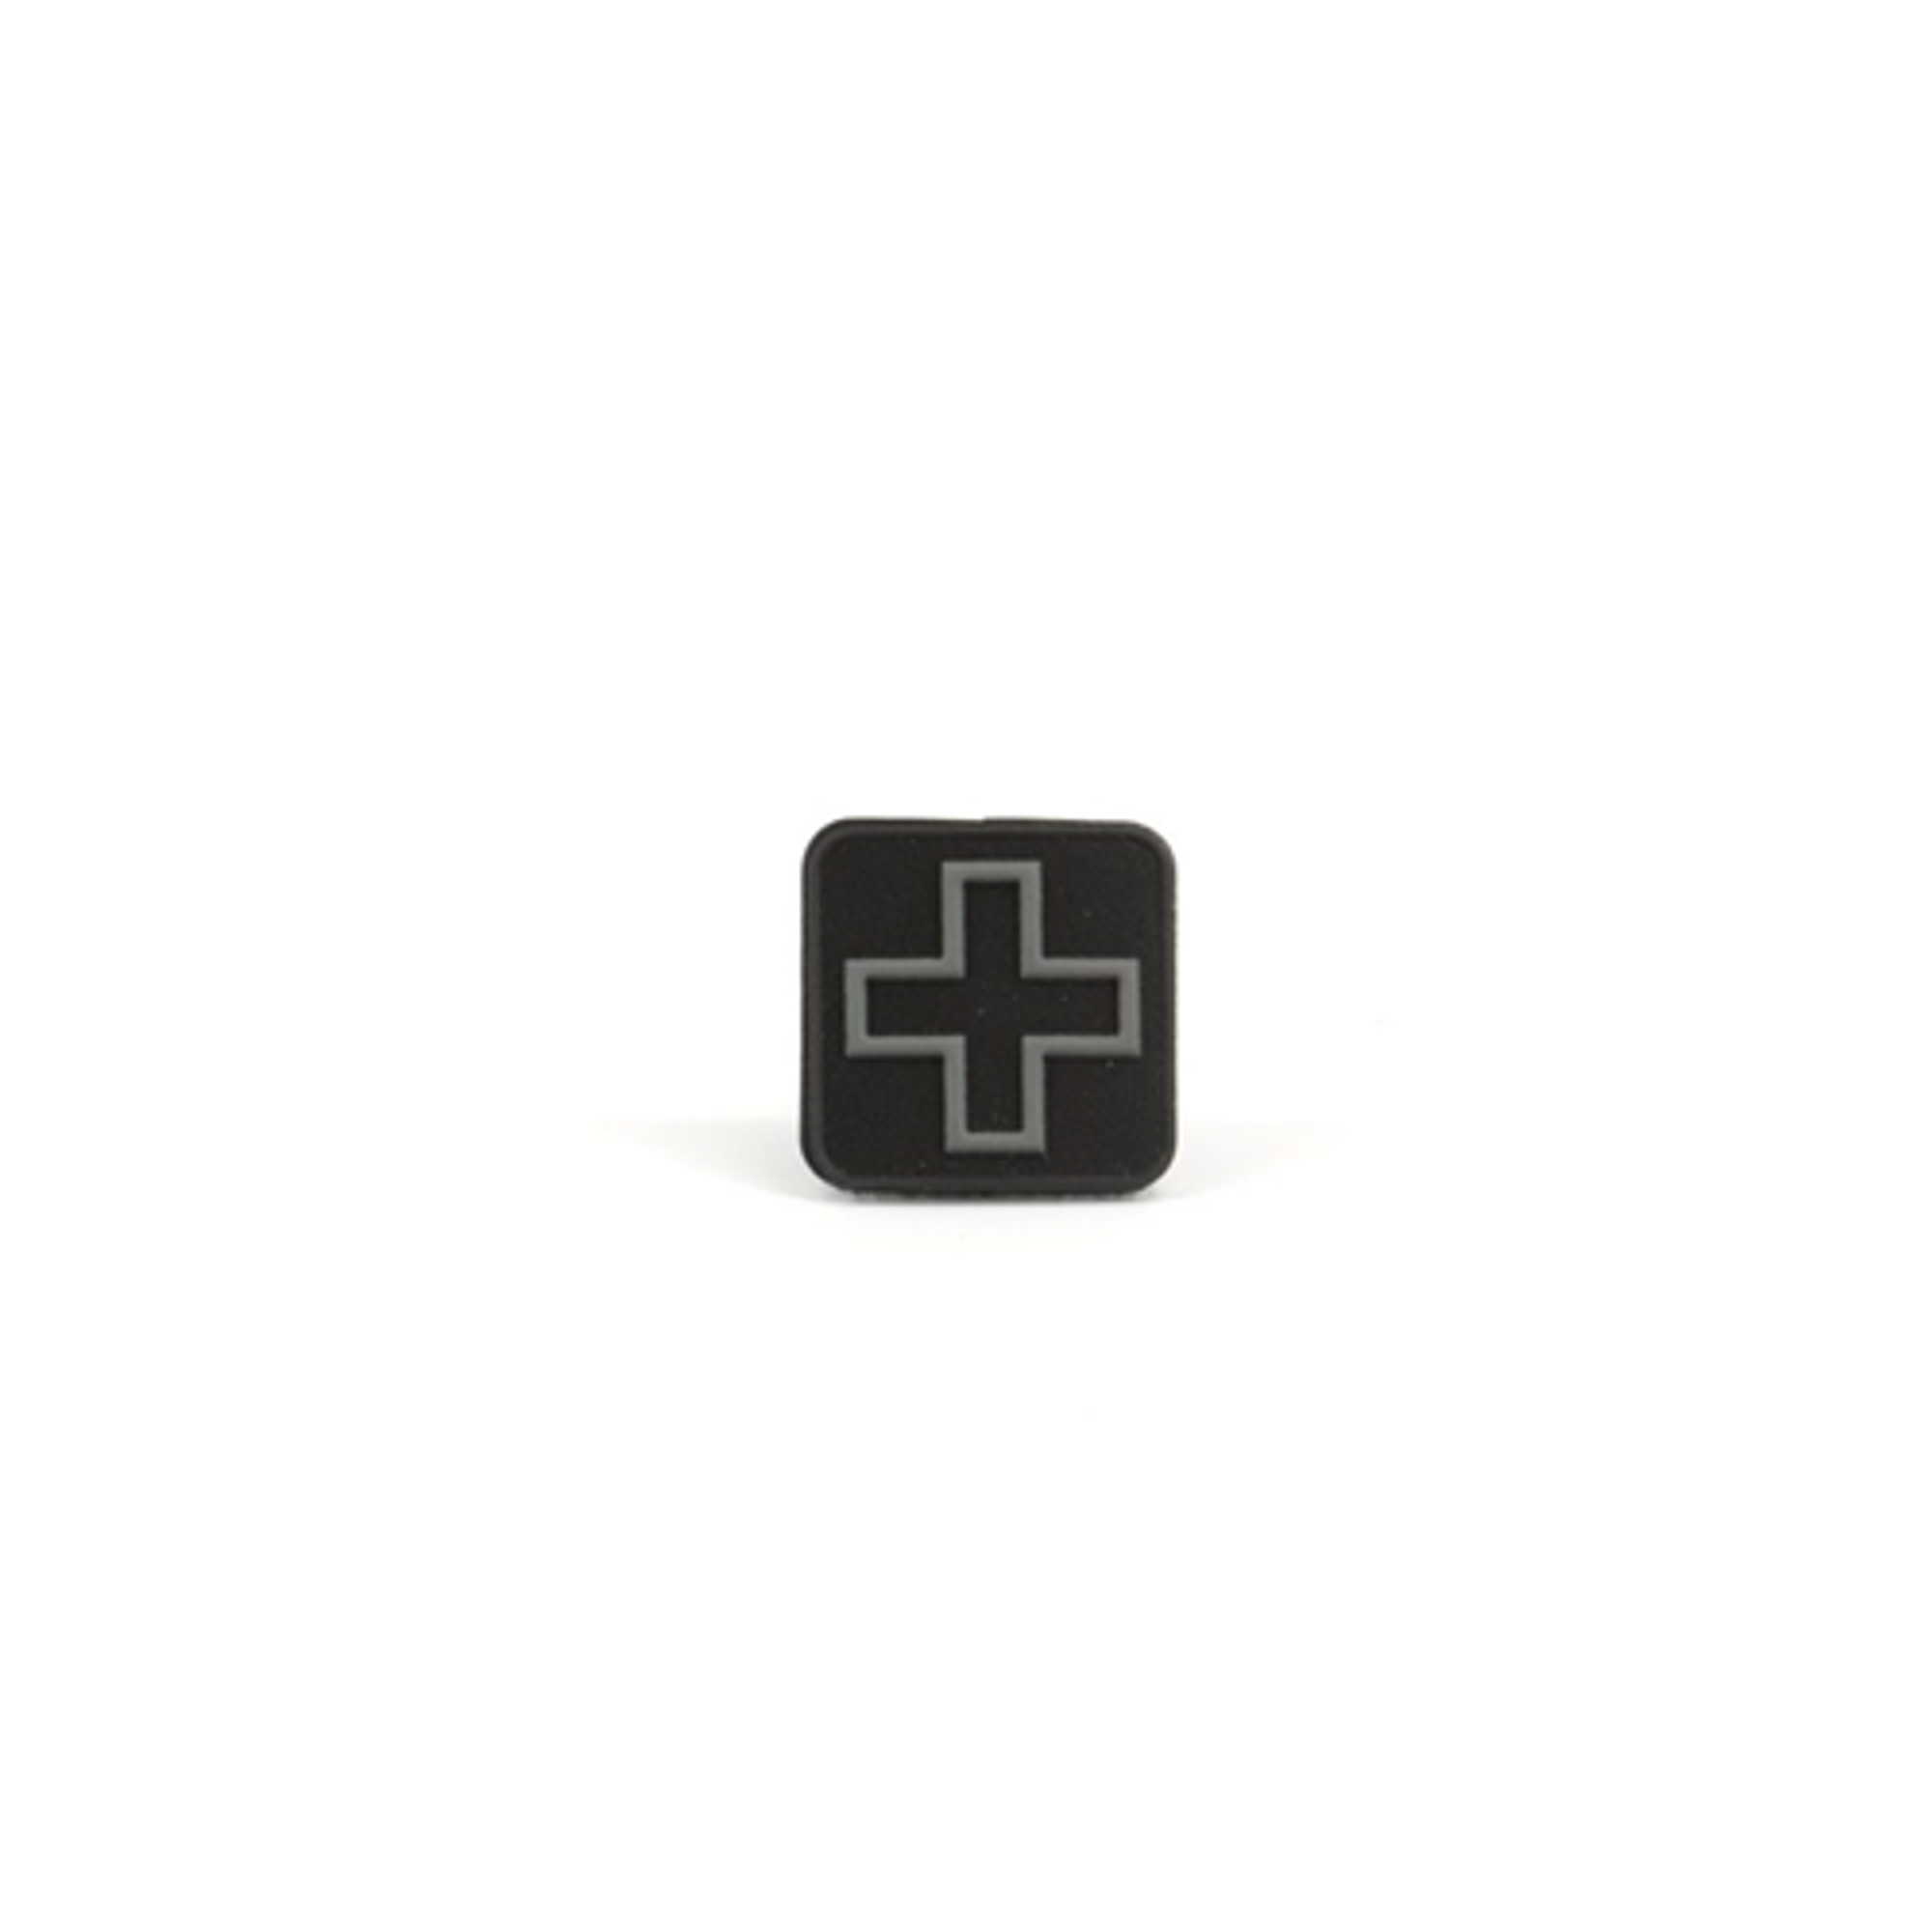 1 Pvc Cross Patches - KRE10-CP-GRY